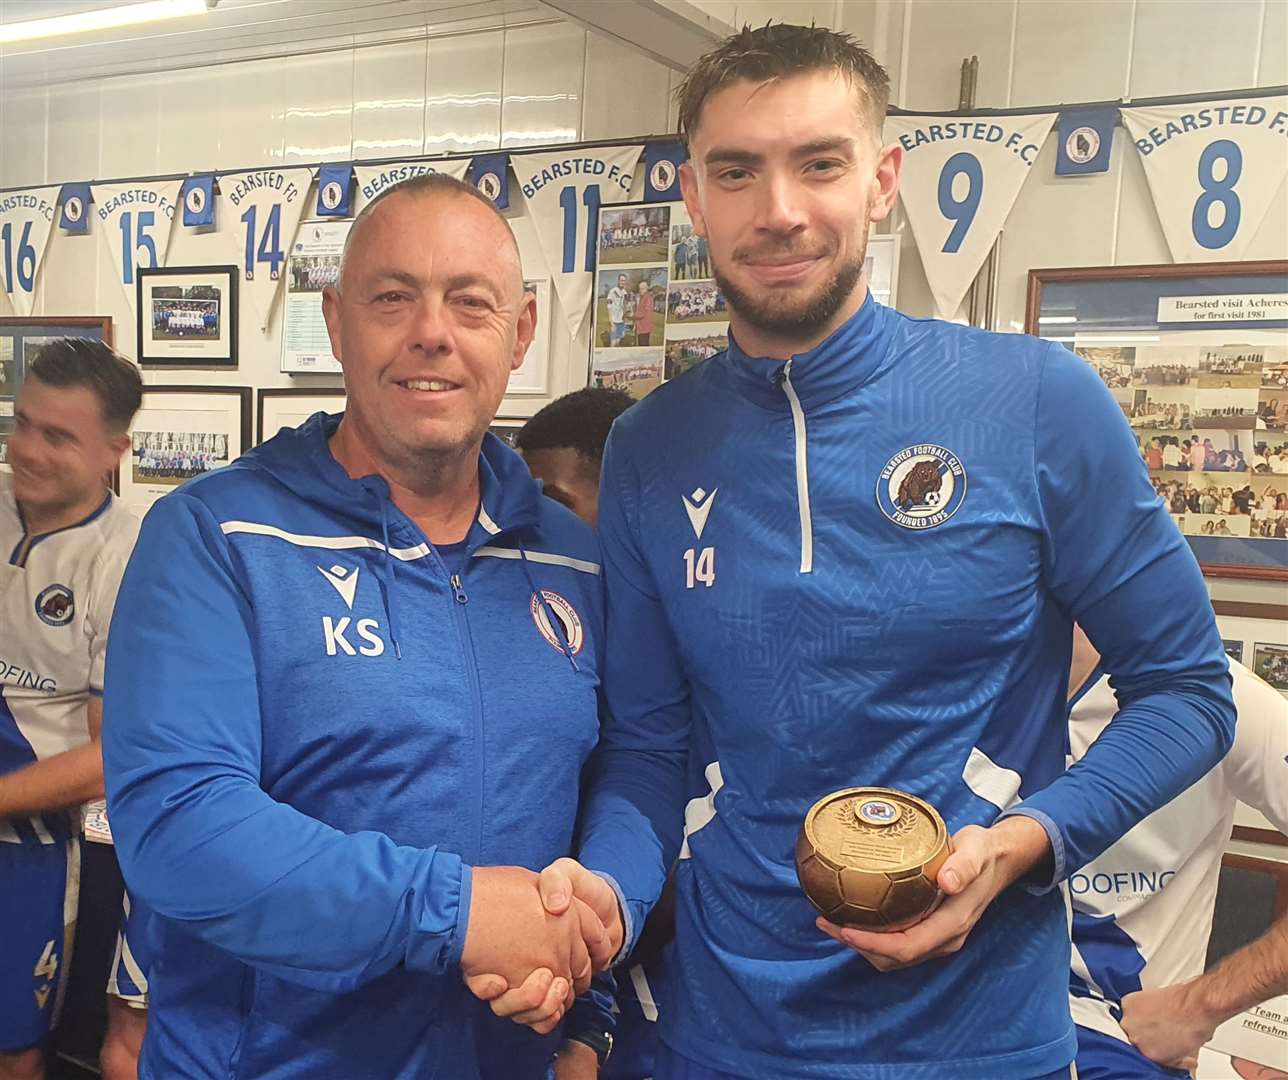 Manager Kevin Stevens, being presented with a memento by captain Ryan Blake, first took charge of the club’s first team in 2013